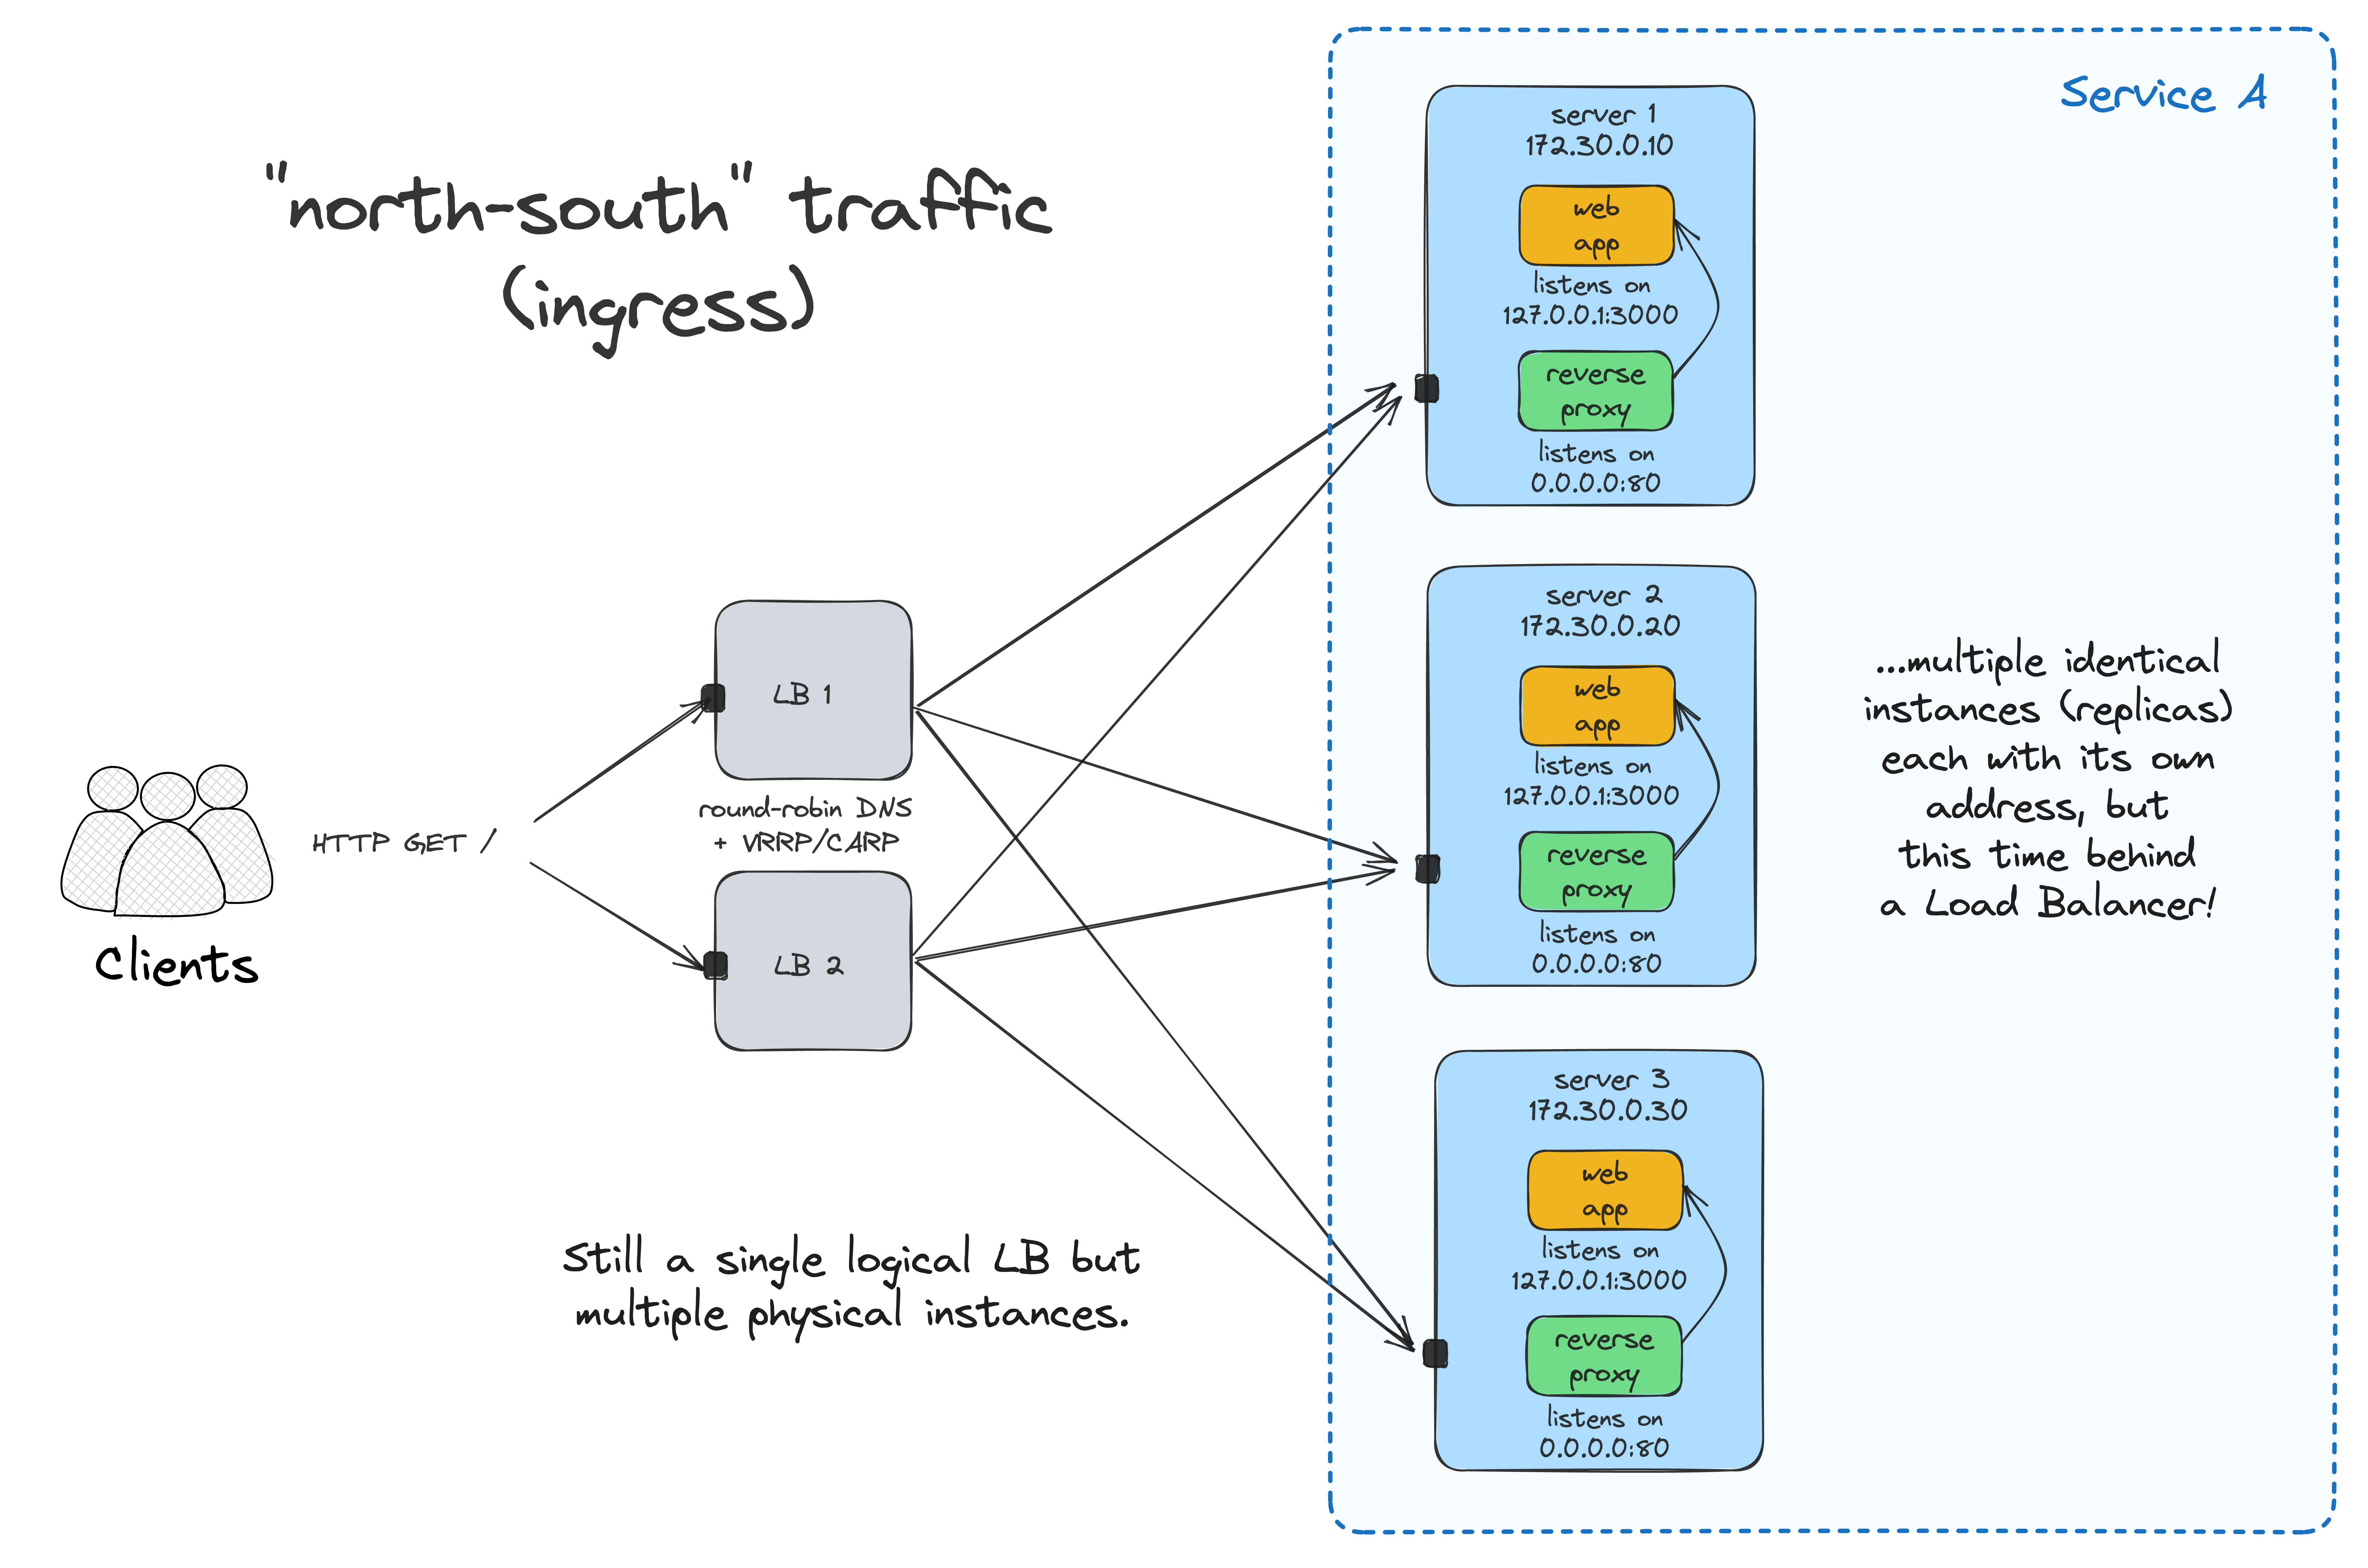 A highly available load balancer implementation with VRRP and round-robin DNS.